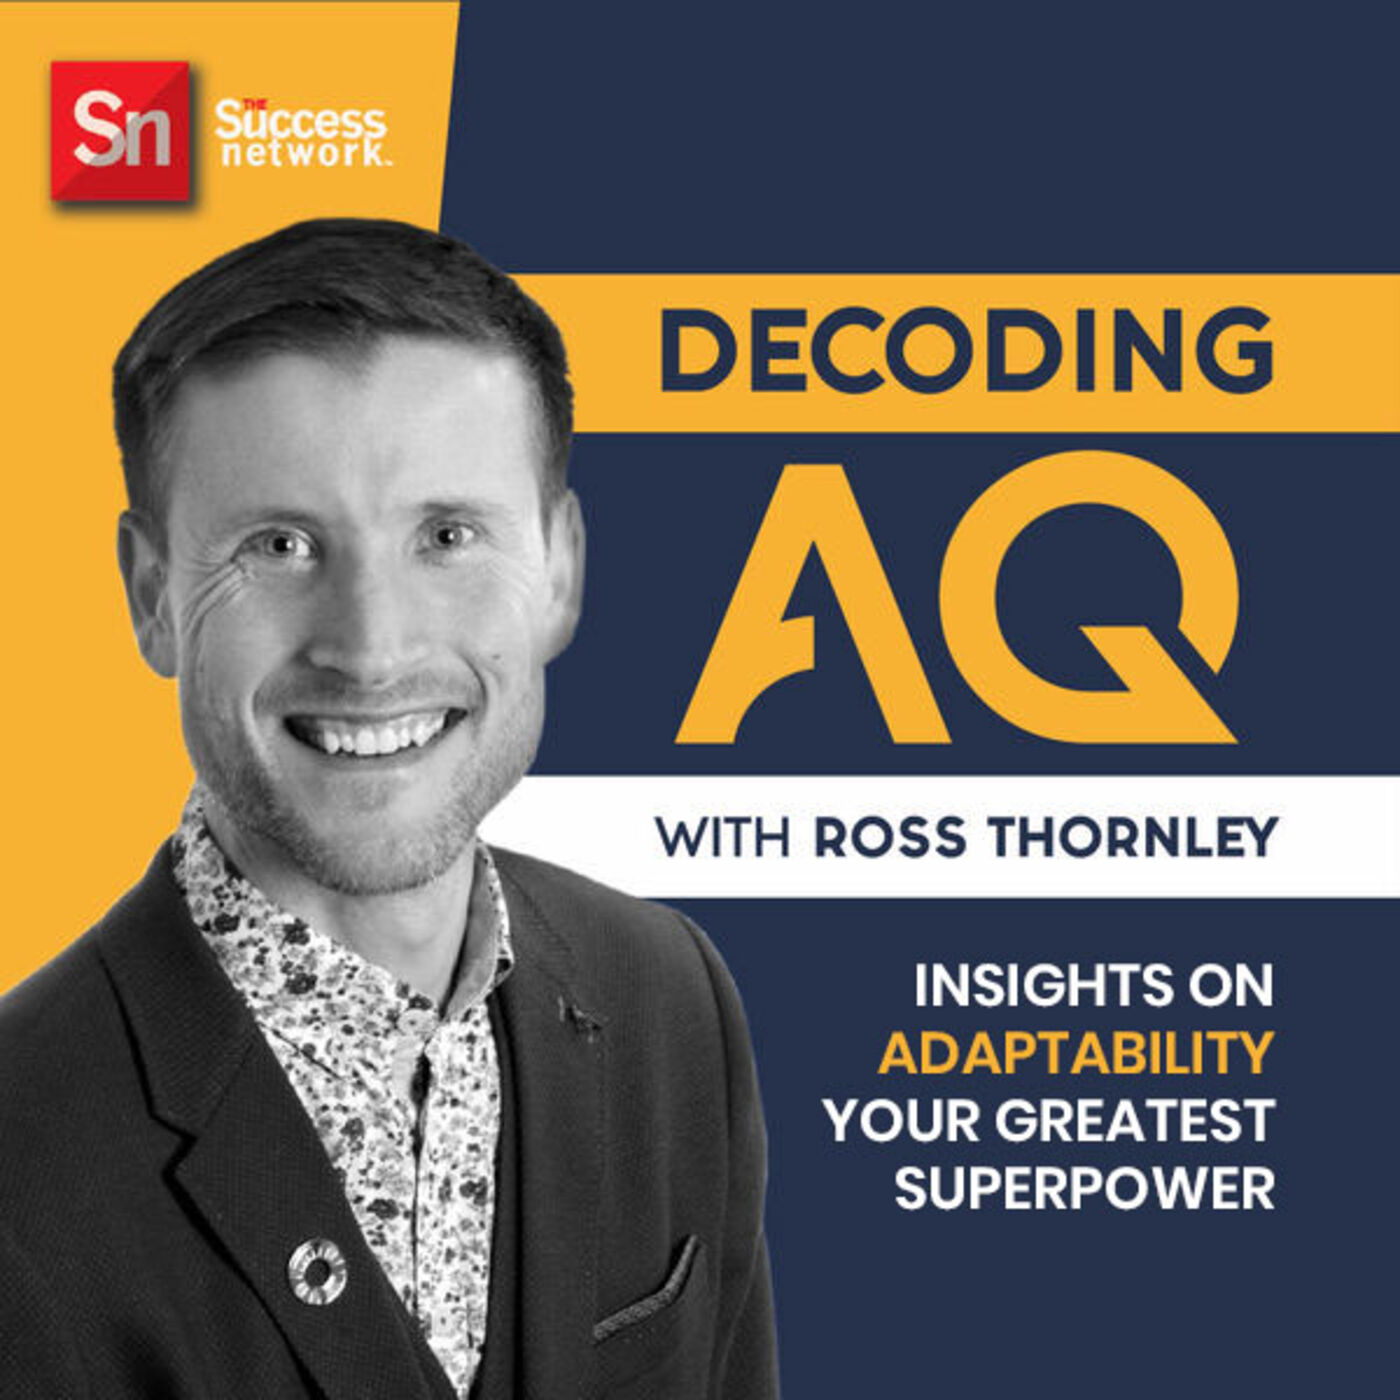 DECODING AQ – Adaptability Confidence With Ross Thornley